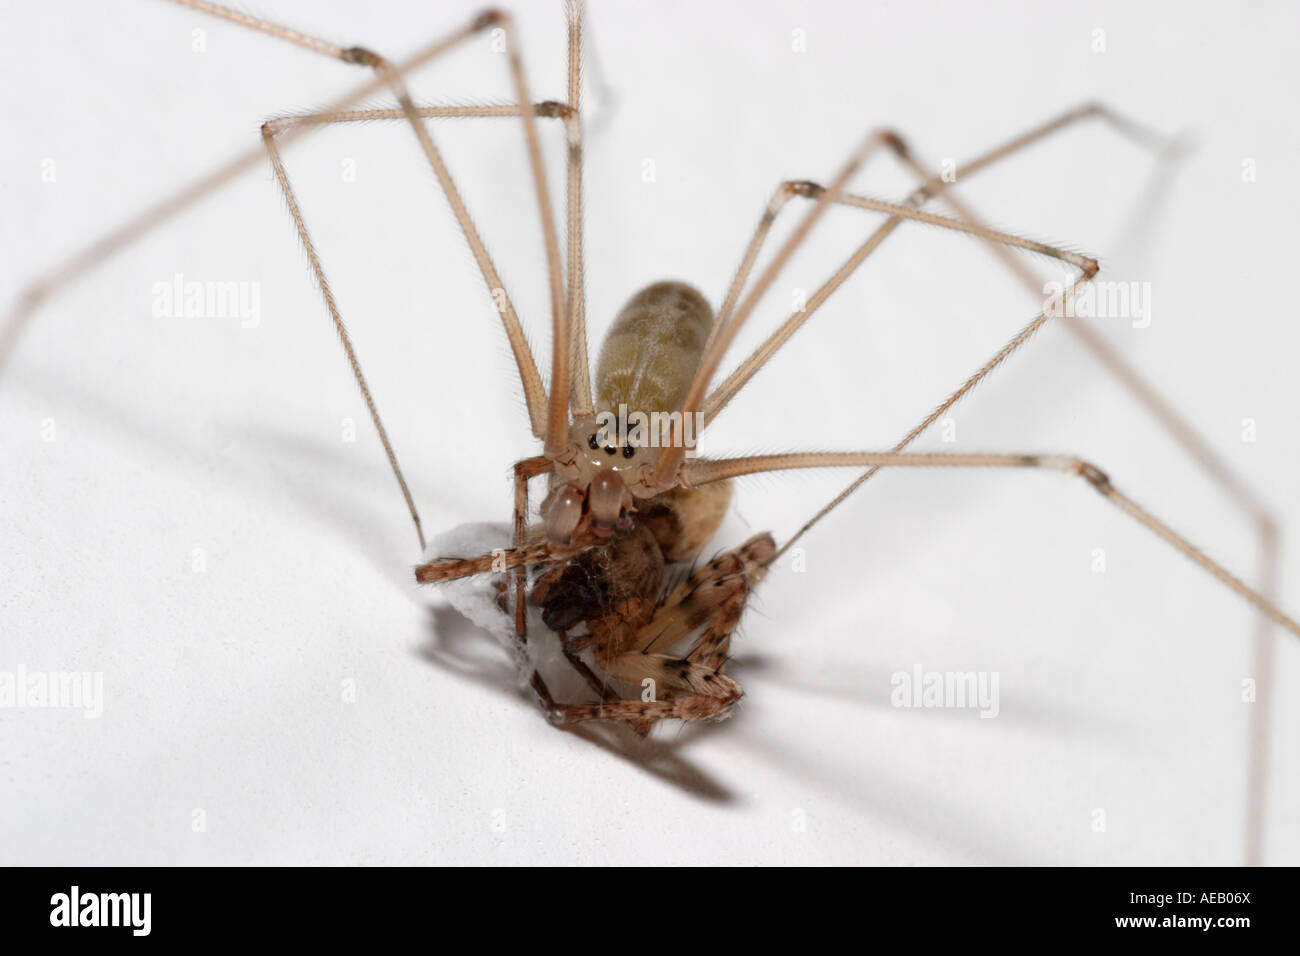 Daddy Long Legs Spider with prey (Pholcus phalangioides) Stock Photo